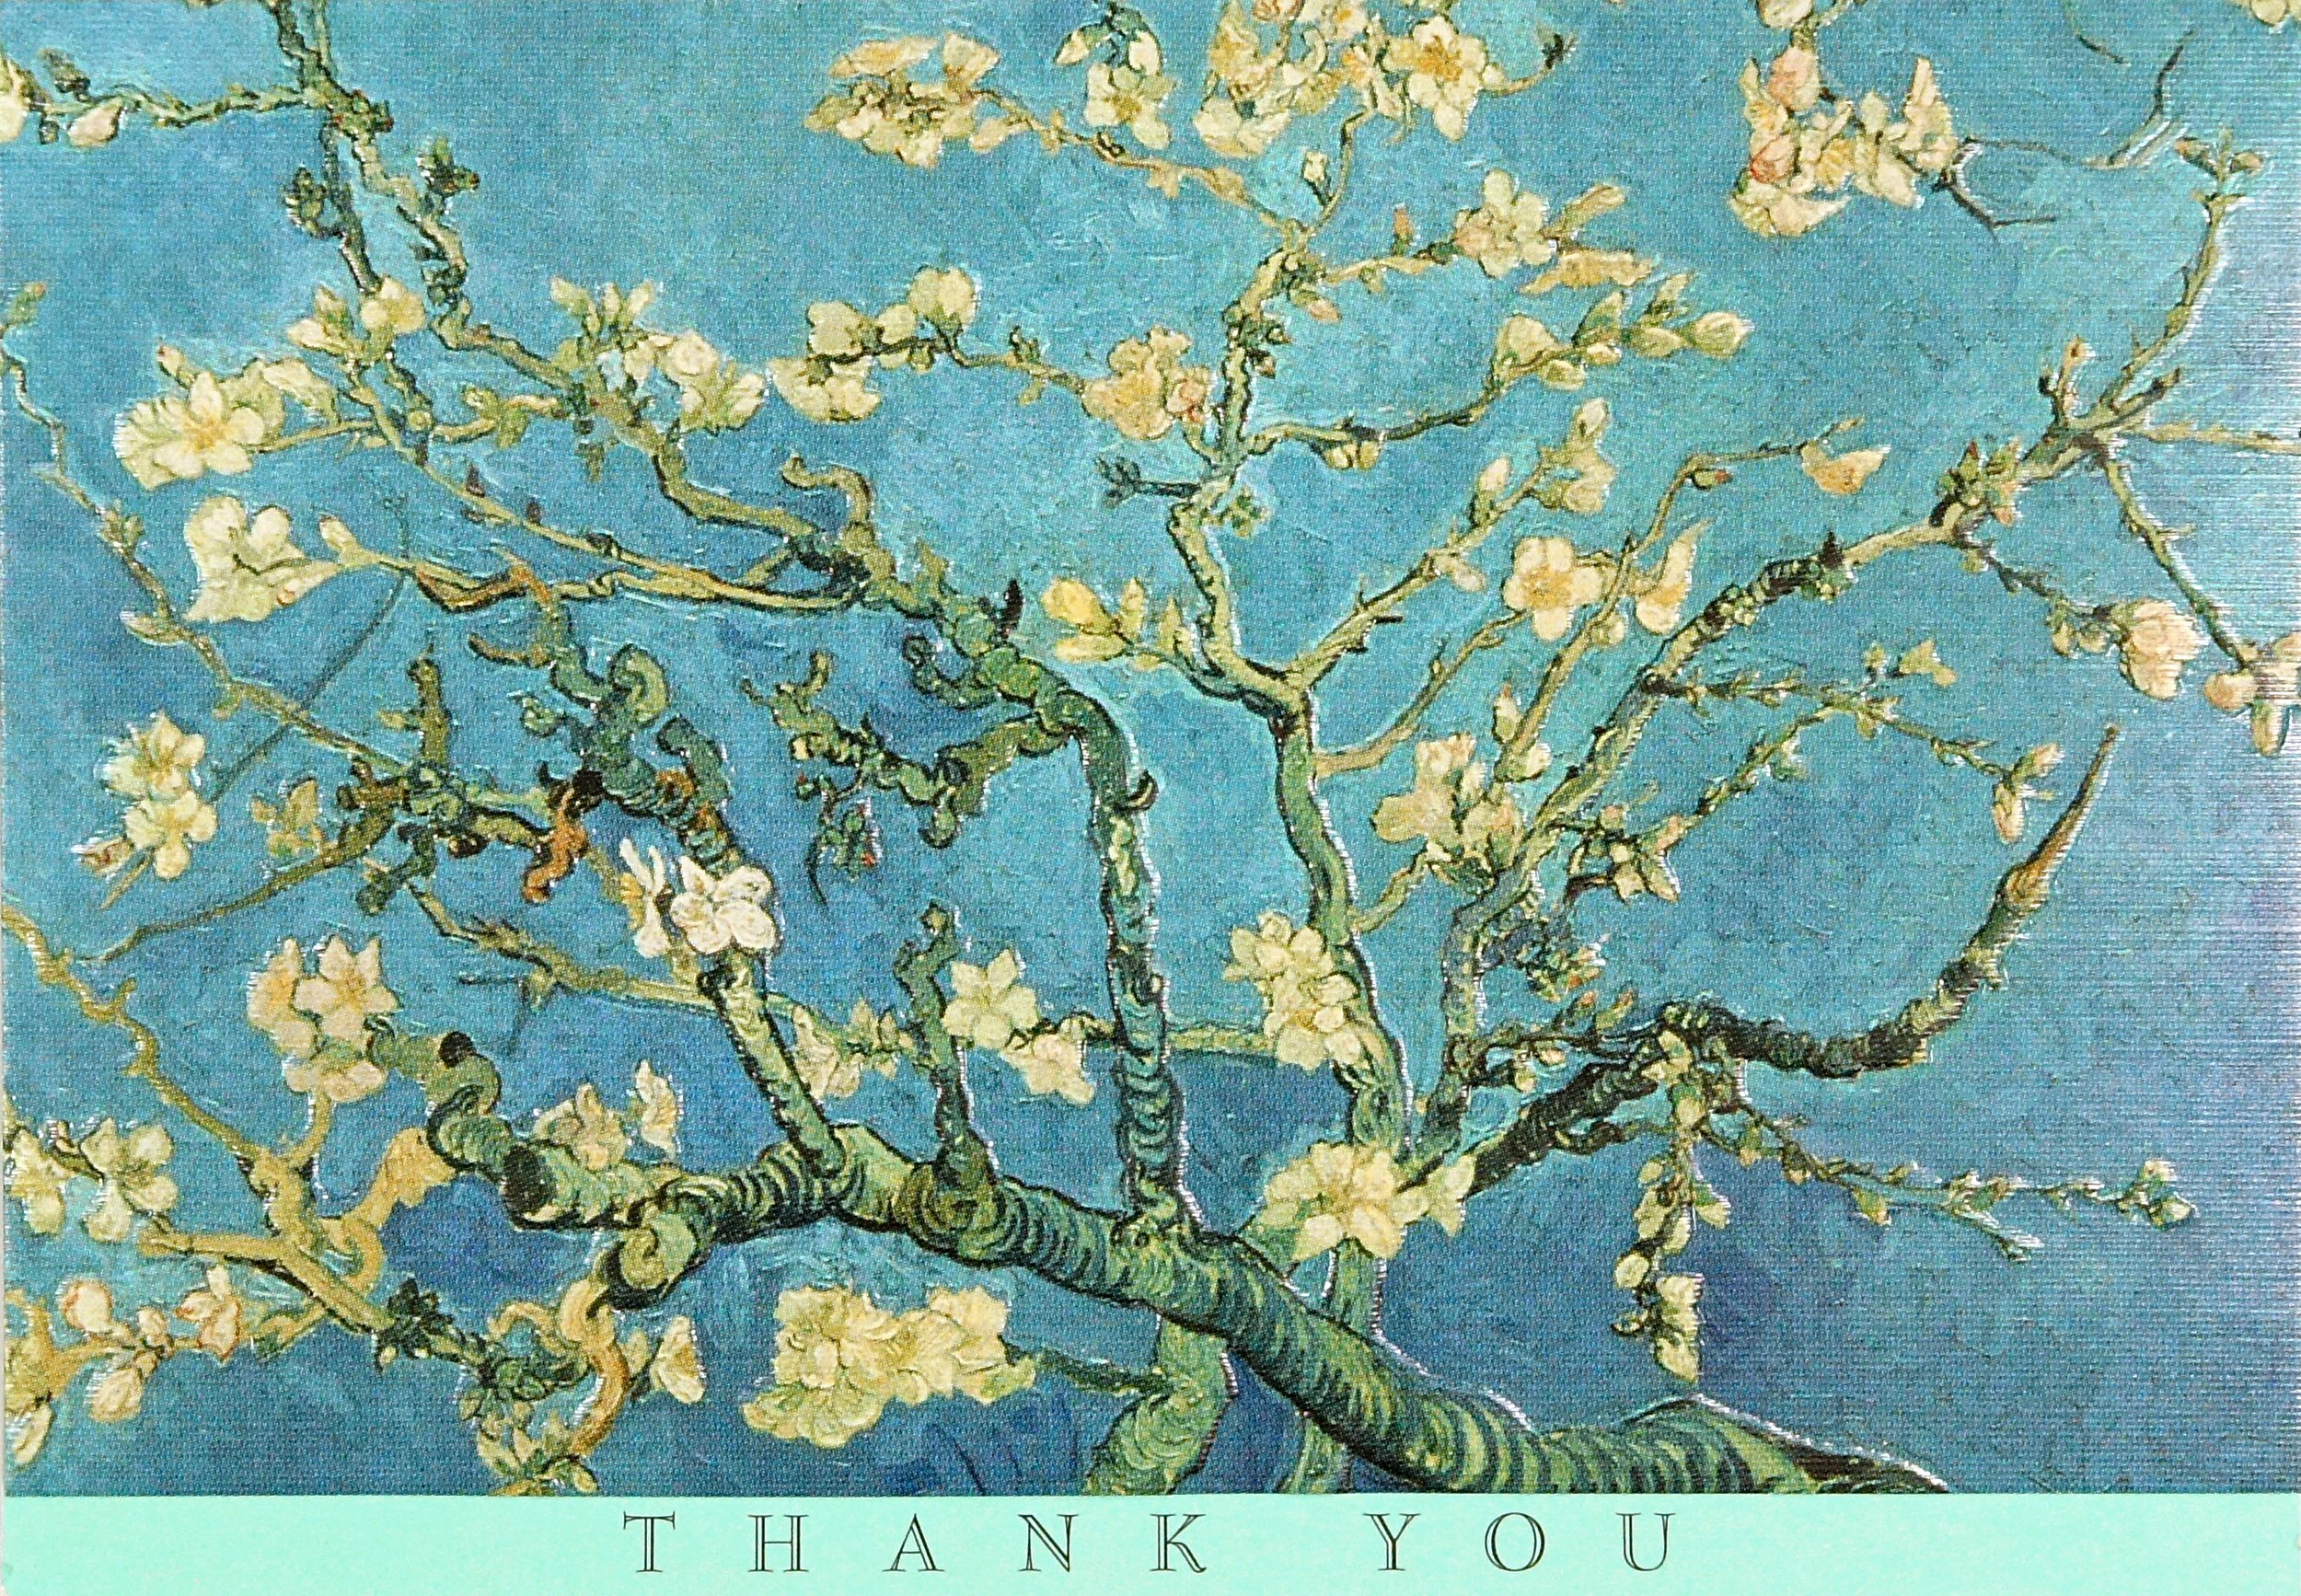 Almond Blossom Thank You Notes (Stationery, Note Cards): Amazon.co ...